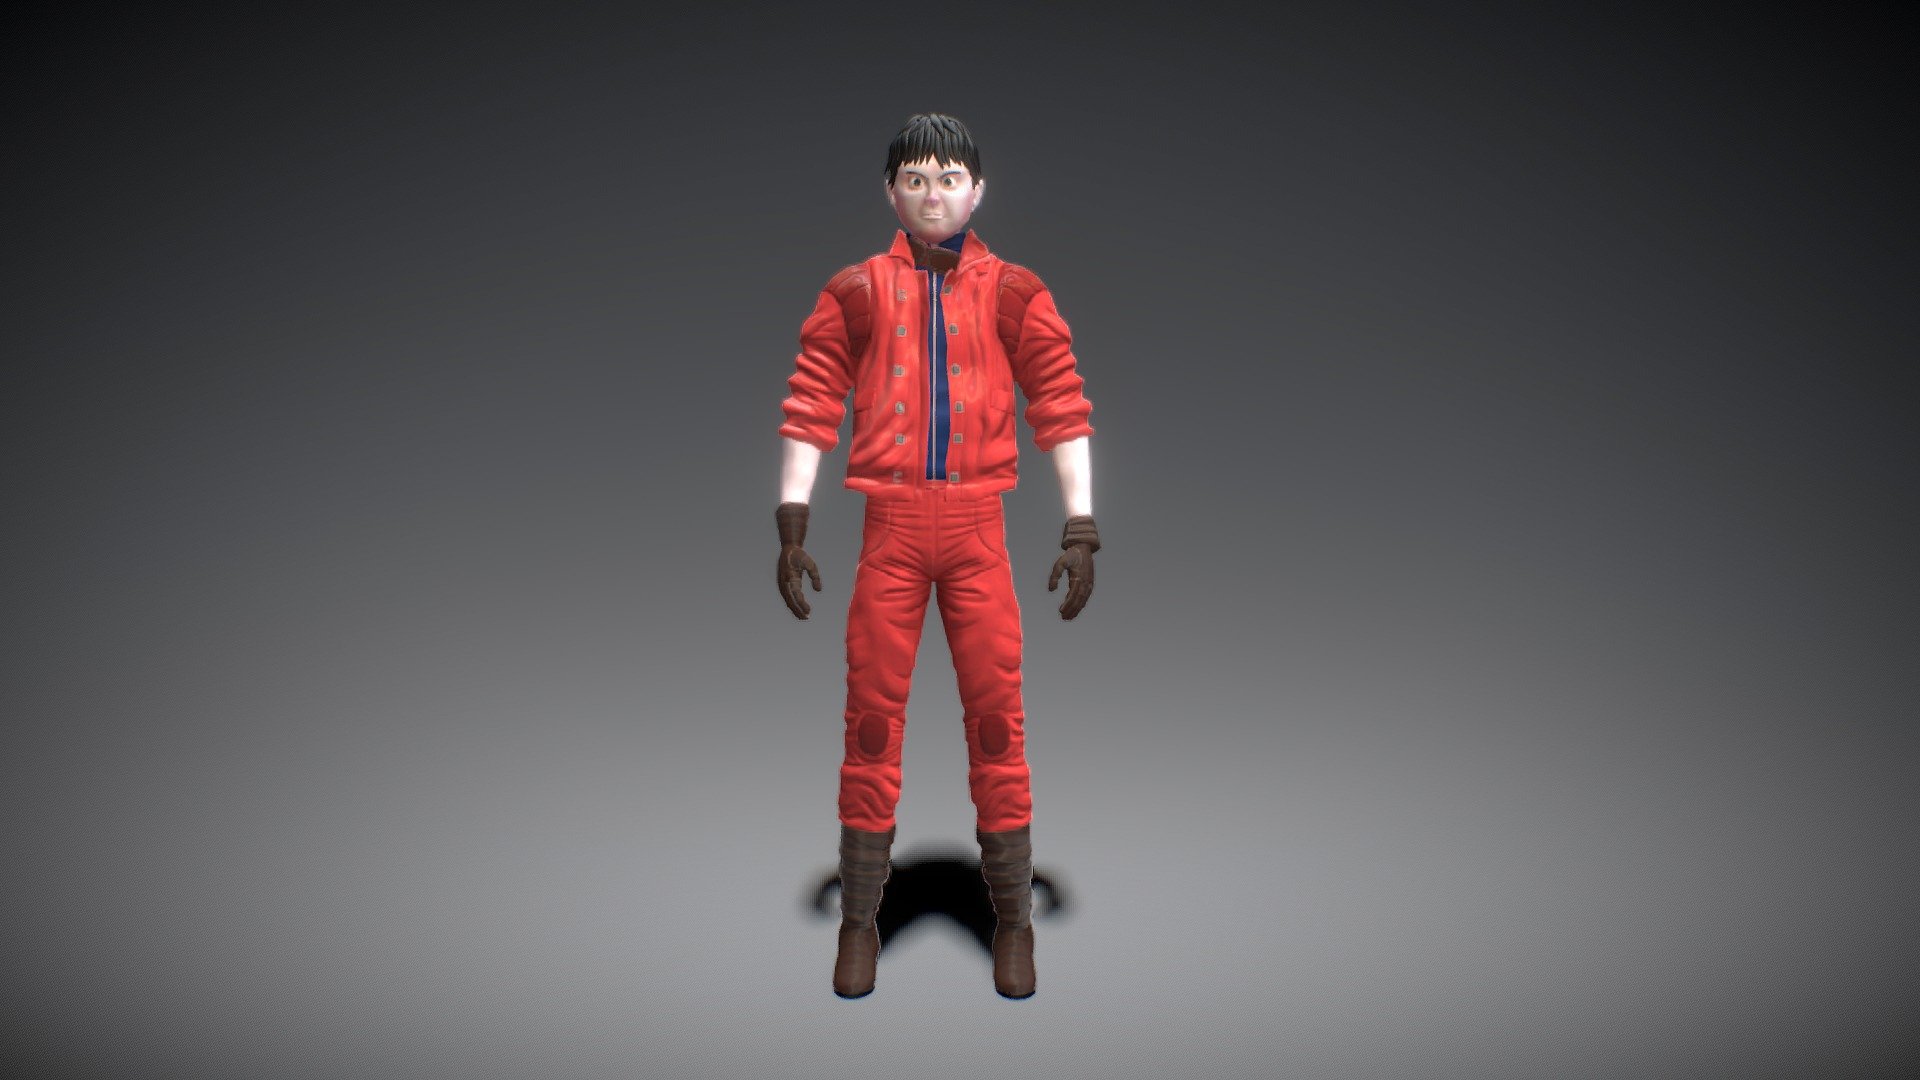 Kaneda from one of my favorite animes ever, Akira!
Still playing with the textures, will be updating to get rid of some seems that are visible.
Weapon and bike coming soon.
Hope you enjoy! - KANEDA!!! - Buy Royalty Free 3D model by rpinto3d 3d model